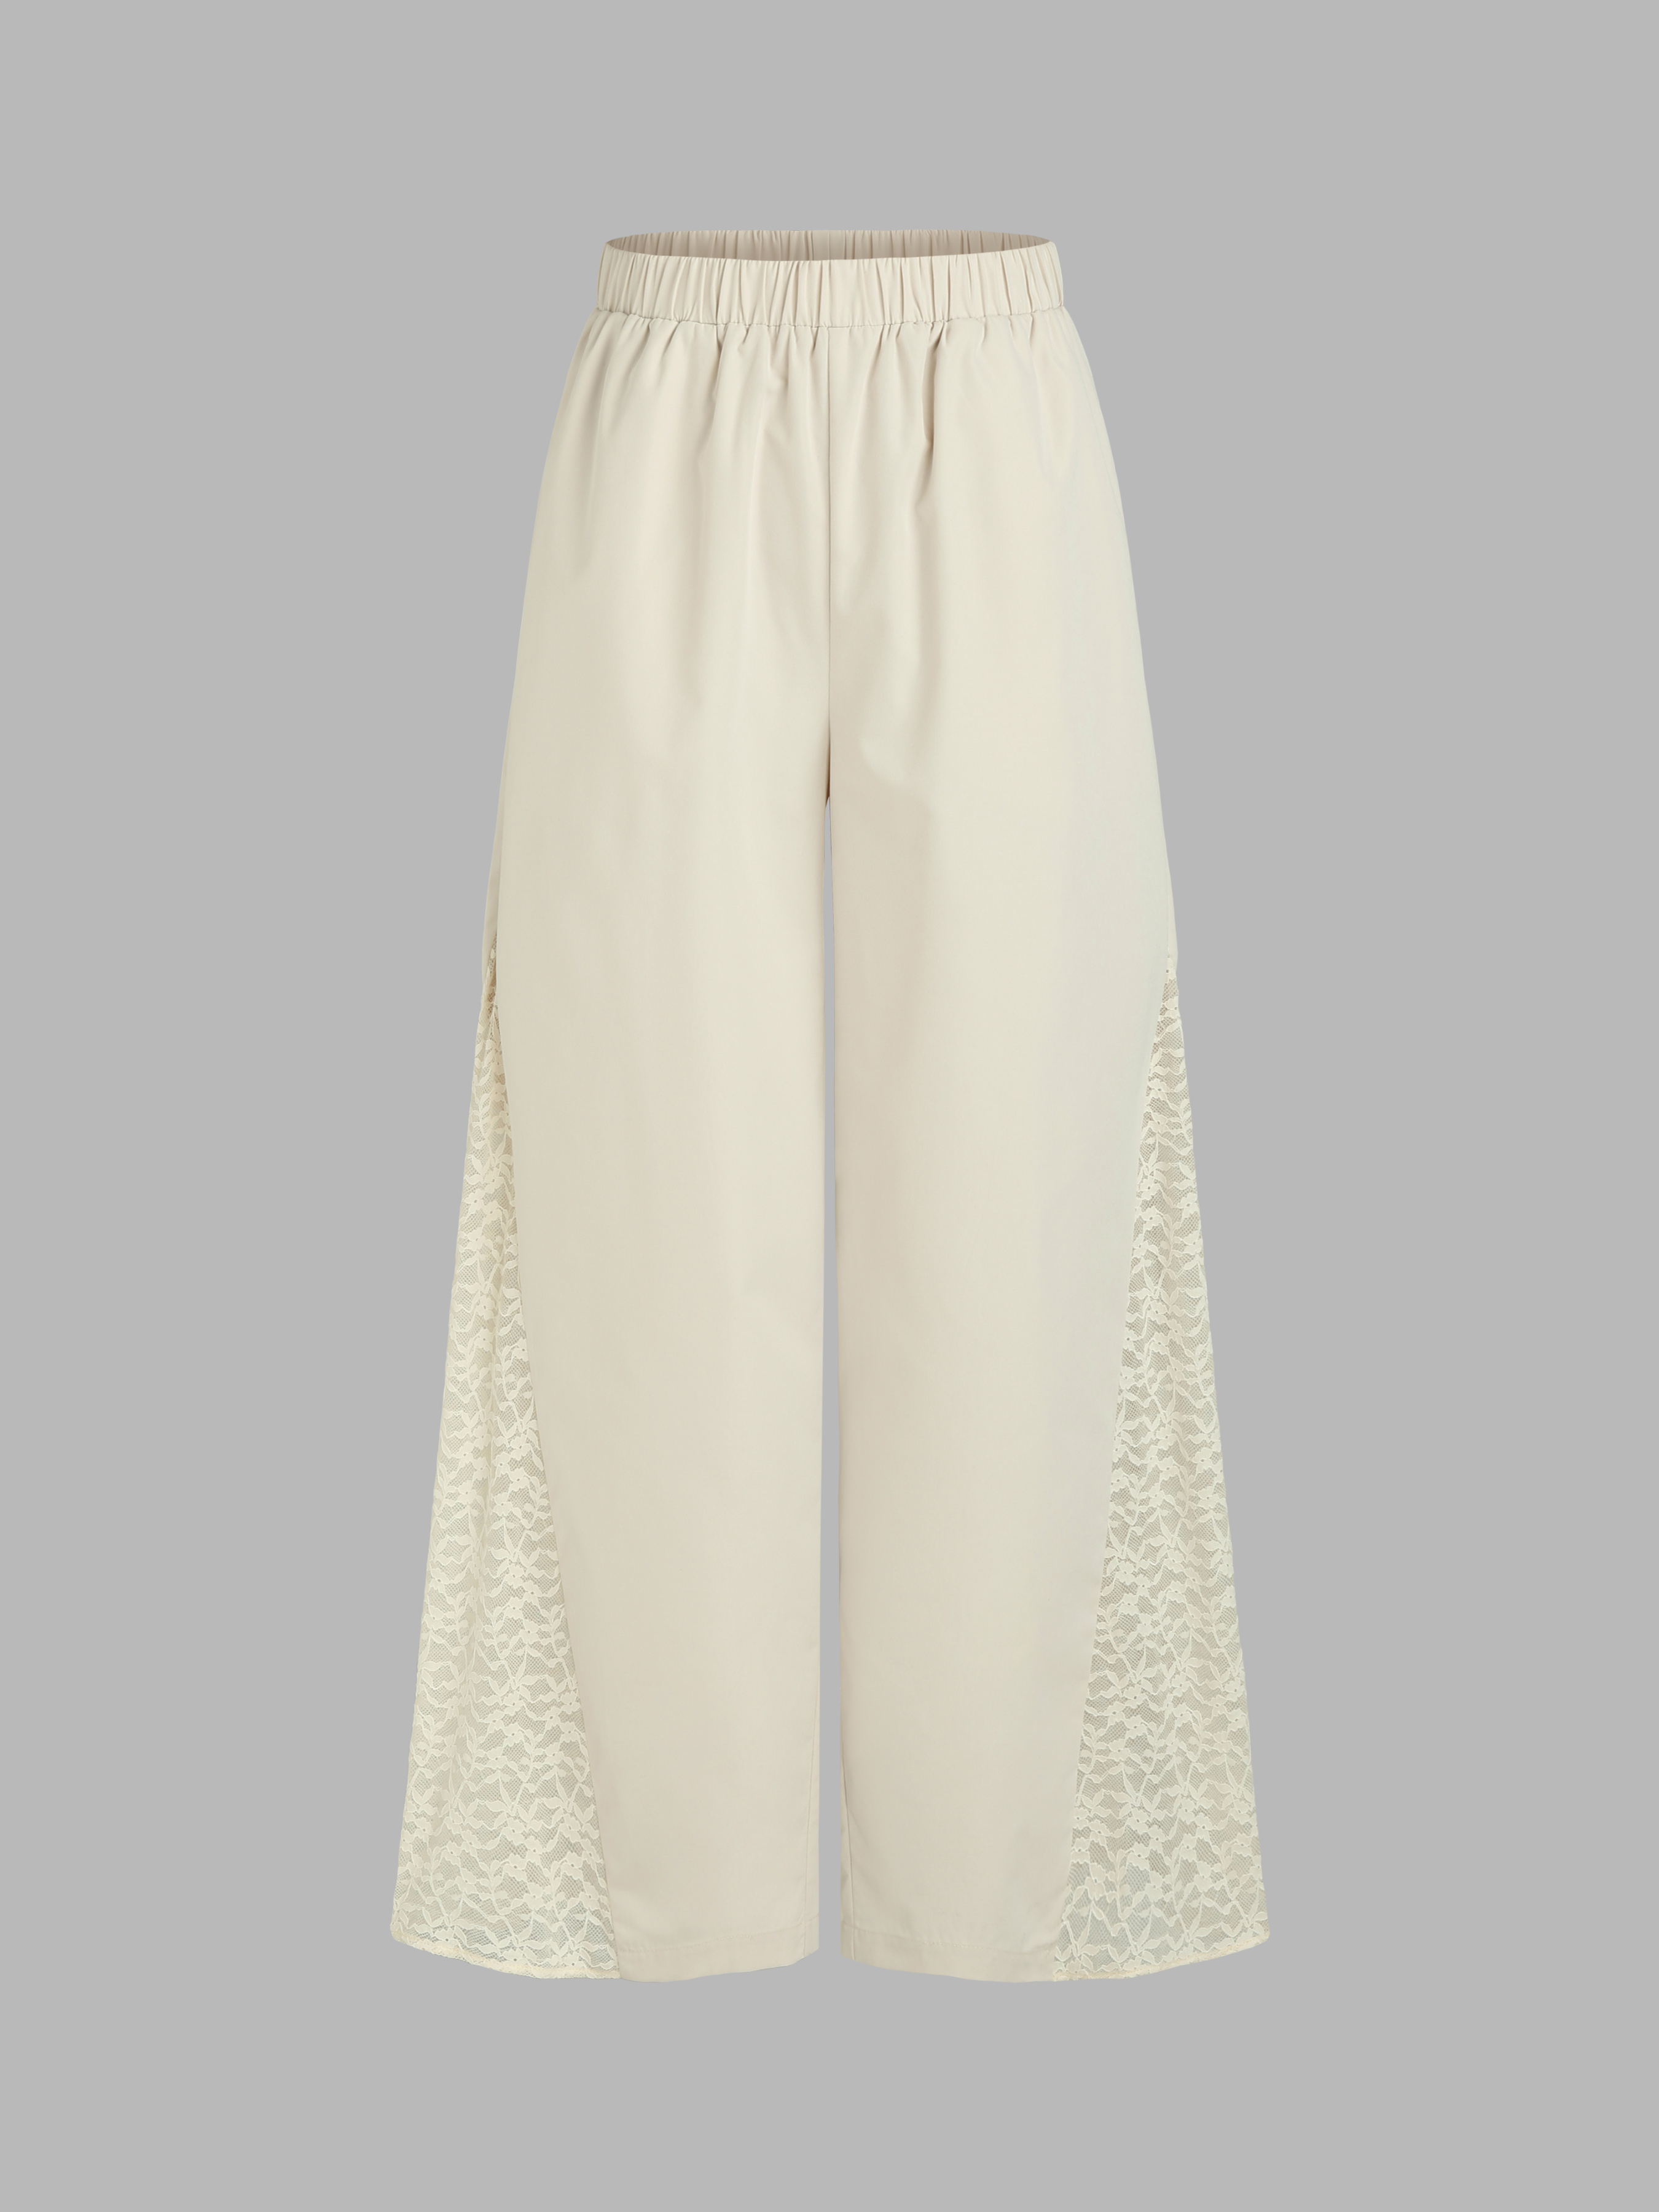 White palazzo pants with pockets and belt